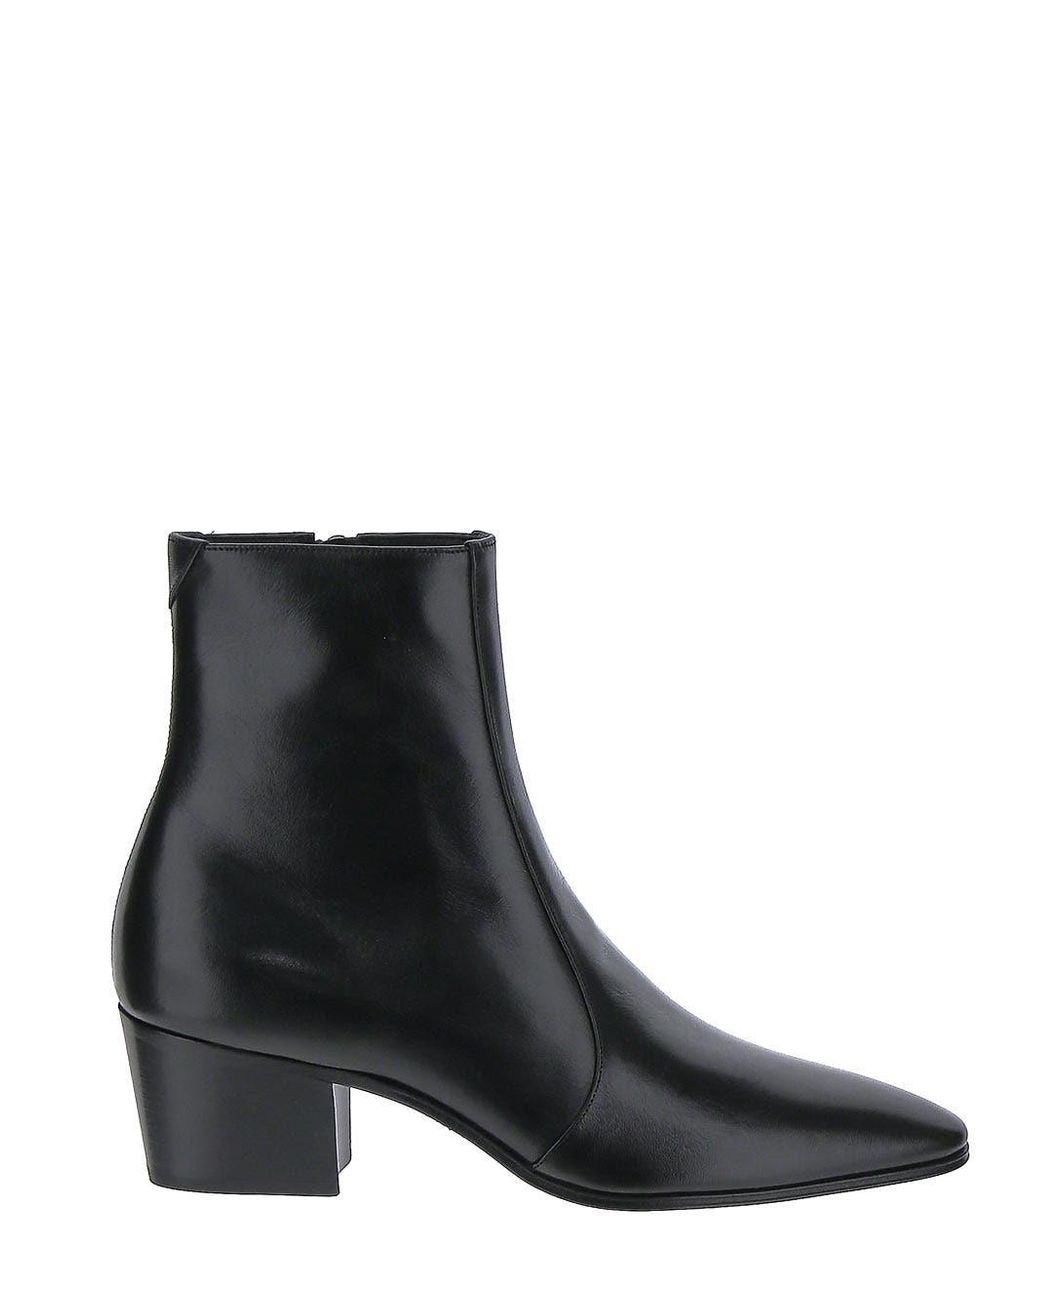 Saint Laurent Vassili Chelsea Boots In Smooth Leather in Black | Lyst